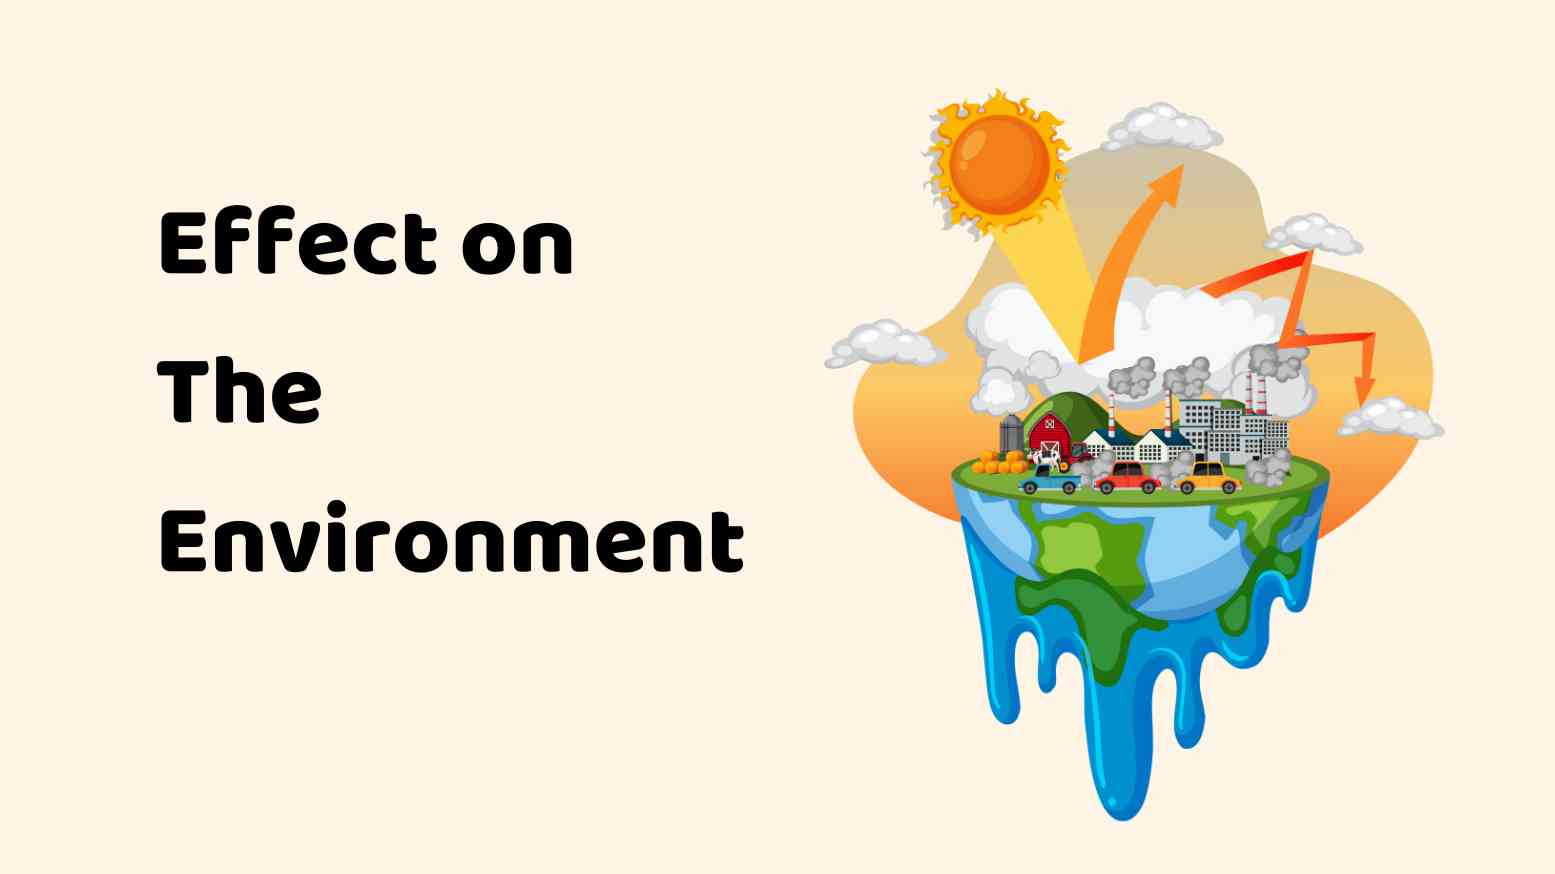 Effect on the Environment